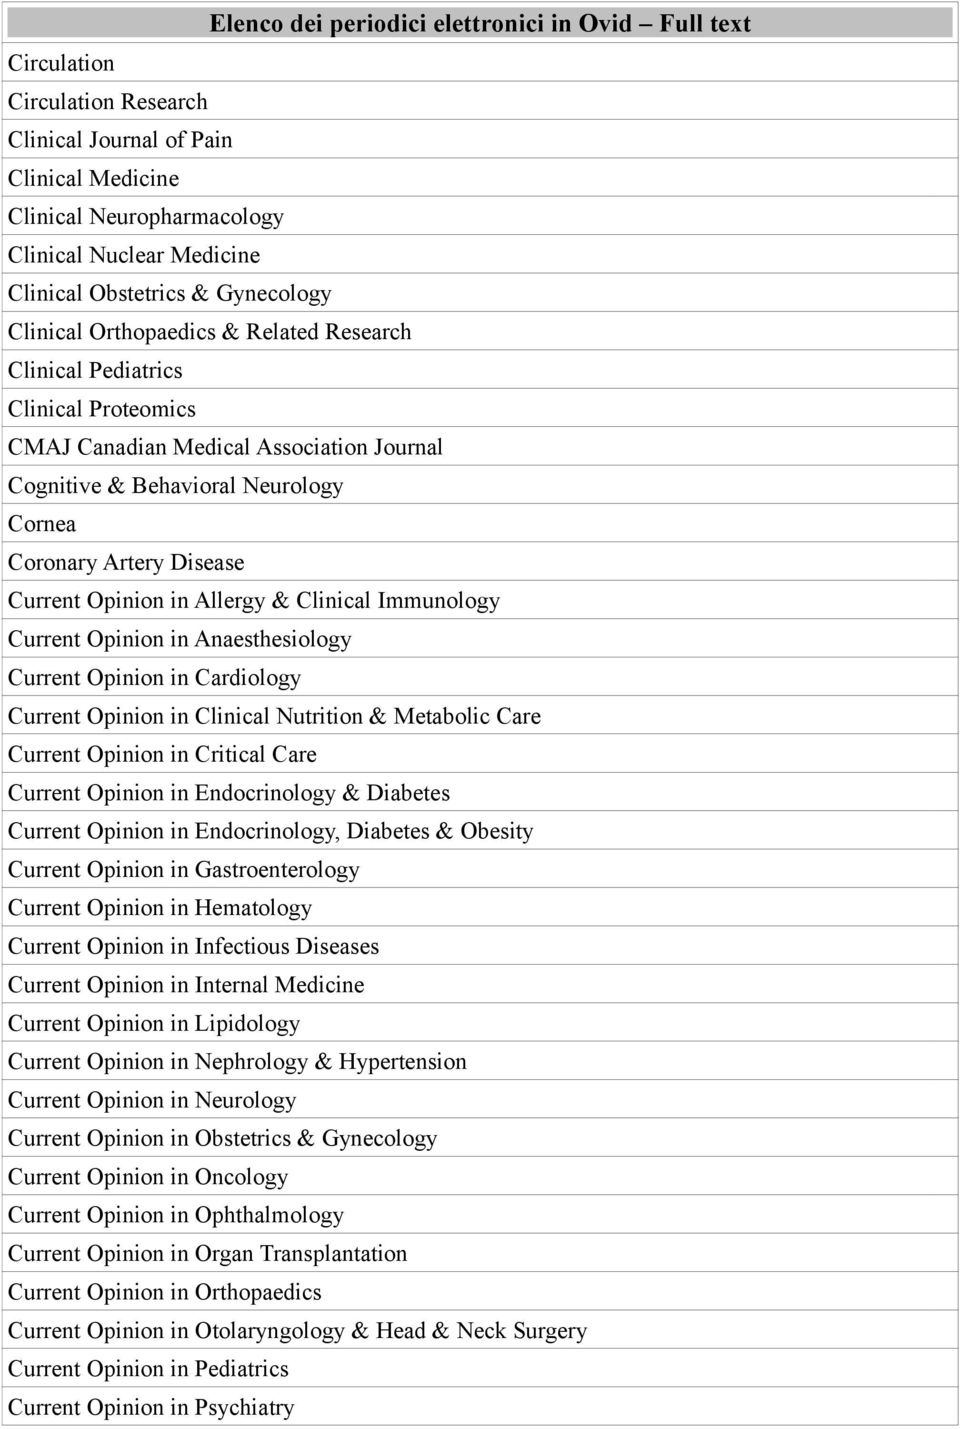 Immunology Current Opinion in Anaesthesiology Current Opinion in Cardiology Current Opinion in Clinical Nutrition & Metabolic Care Current Opinion in Critical Care Current Opinion in Endocrinology &